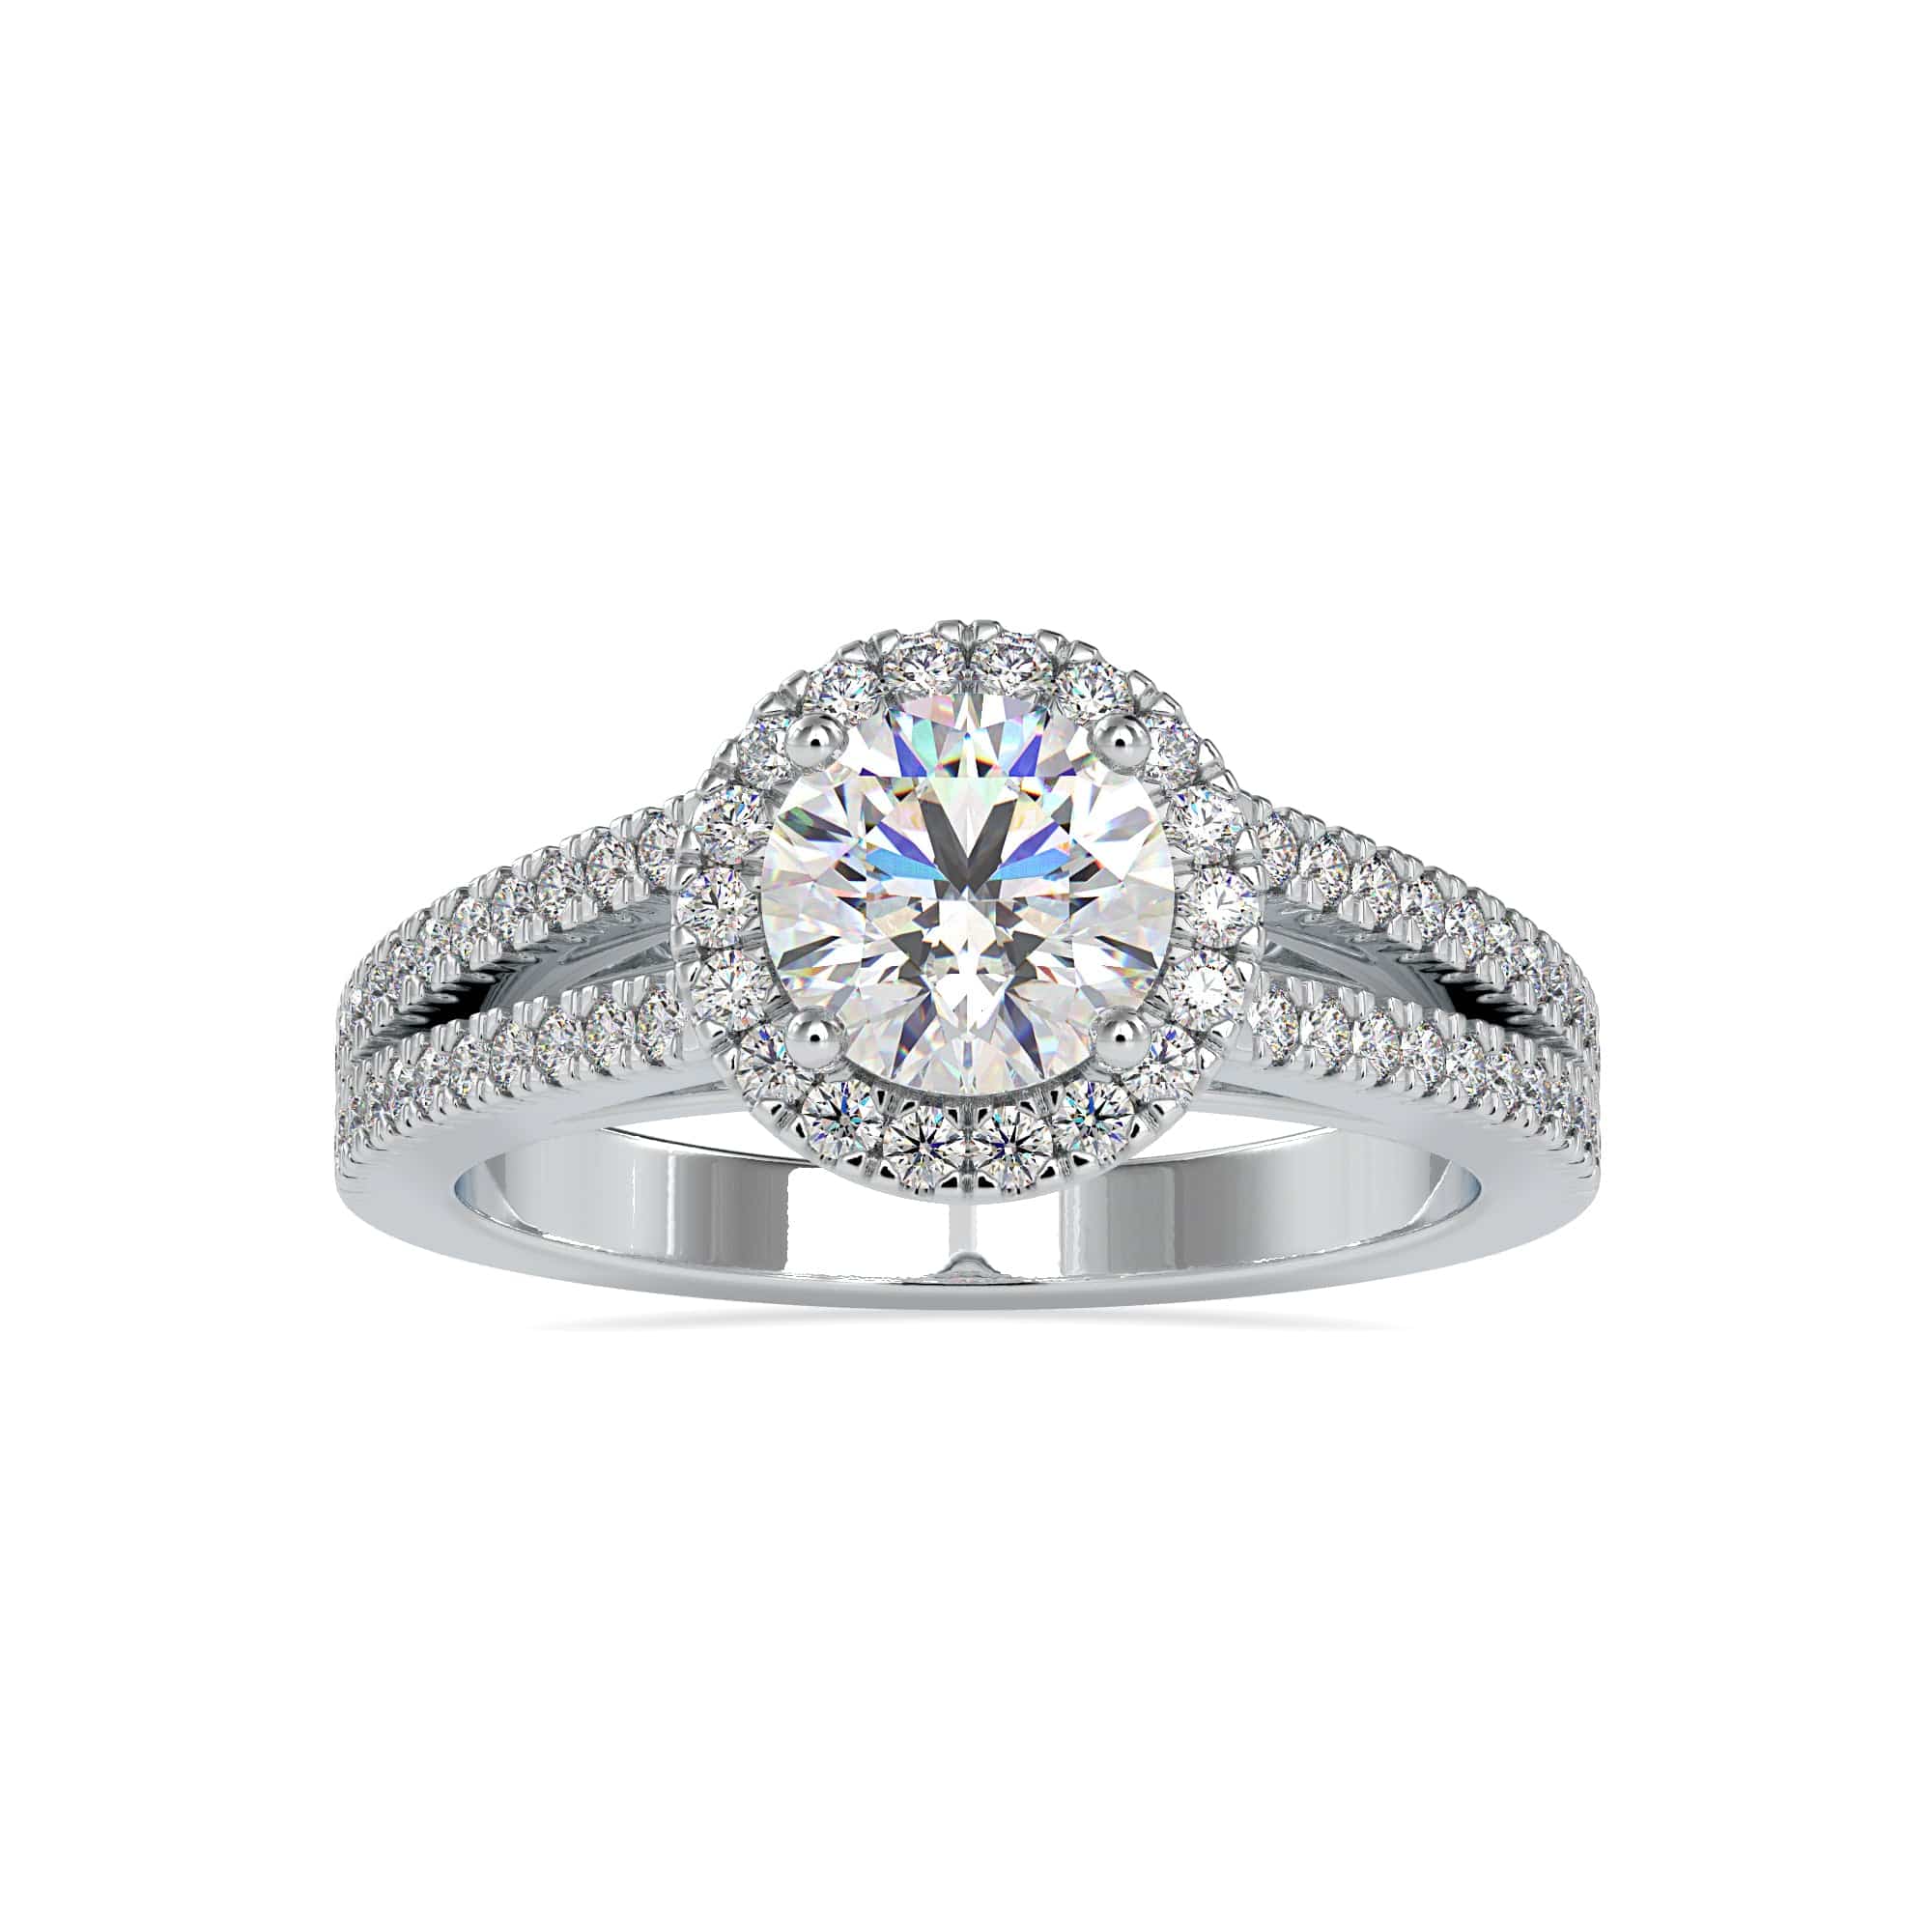 Natalie Build Your Own Earth Born Diamond Engagement Ring 1/5ct – Steven  Singer Jewelers